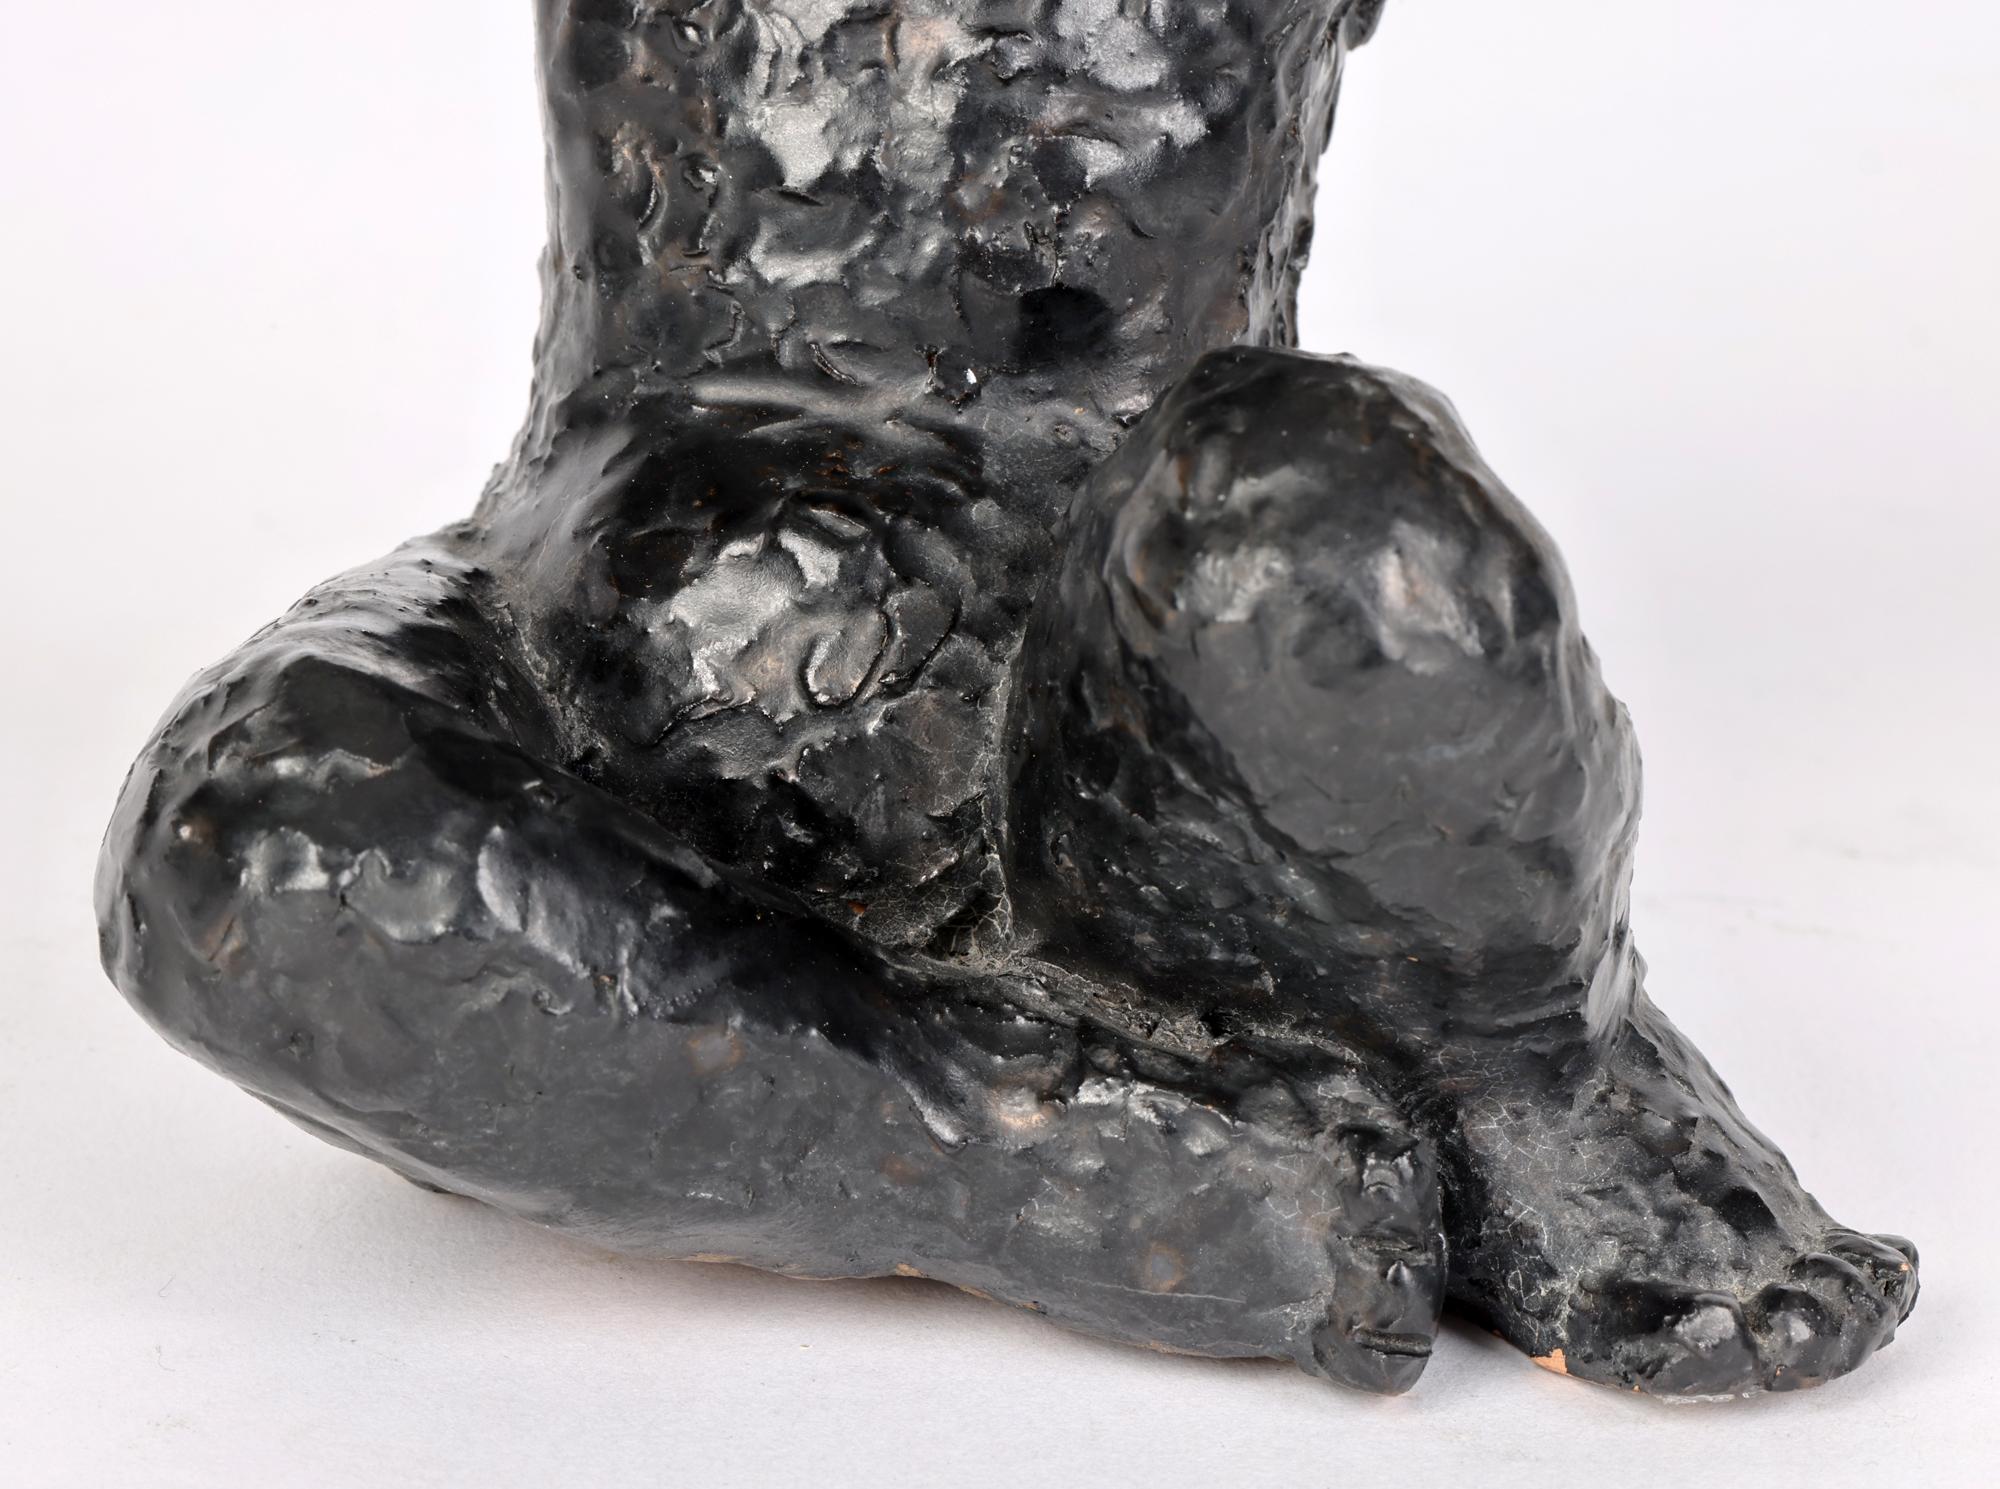 Mid-Century Modern George West Studio Pottery Black Glazed Seated Child Sculpture Dated 1969 For Sale